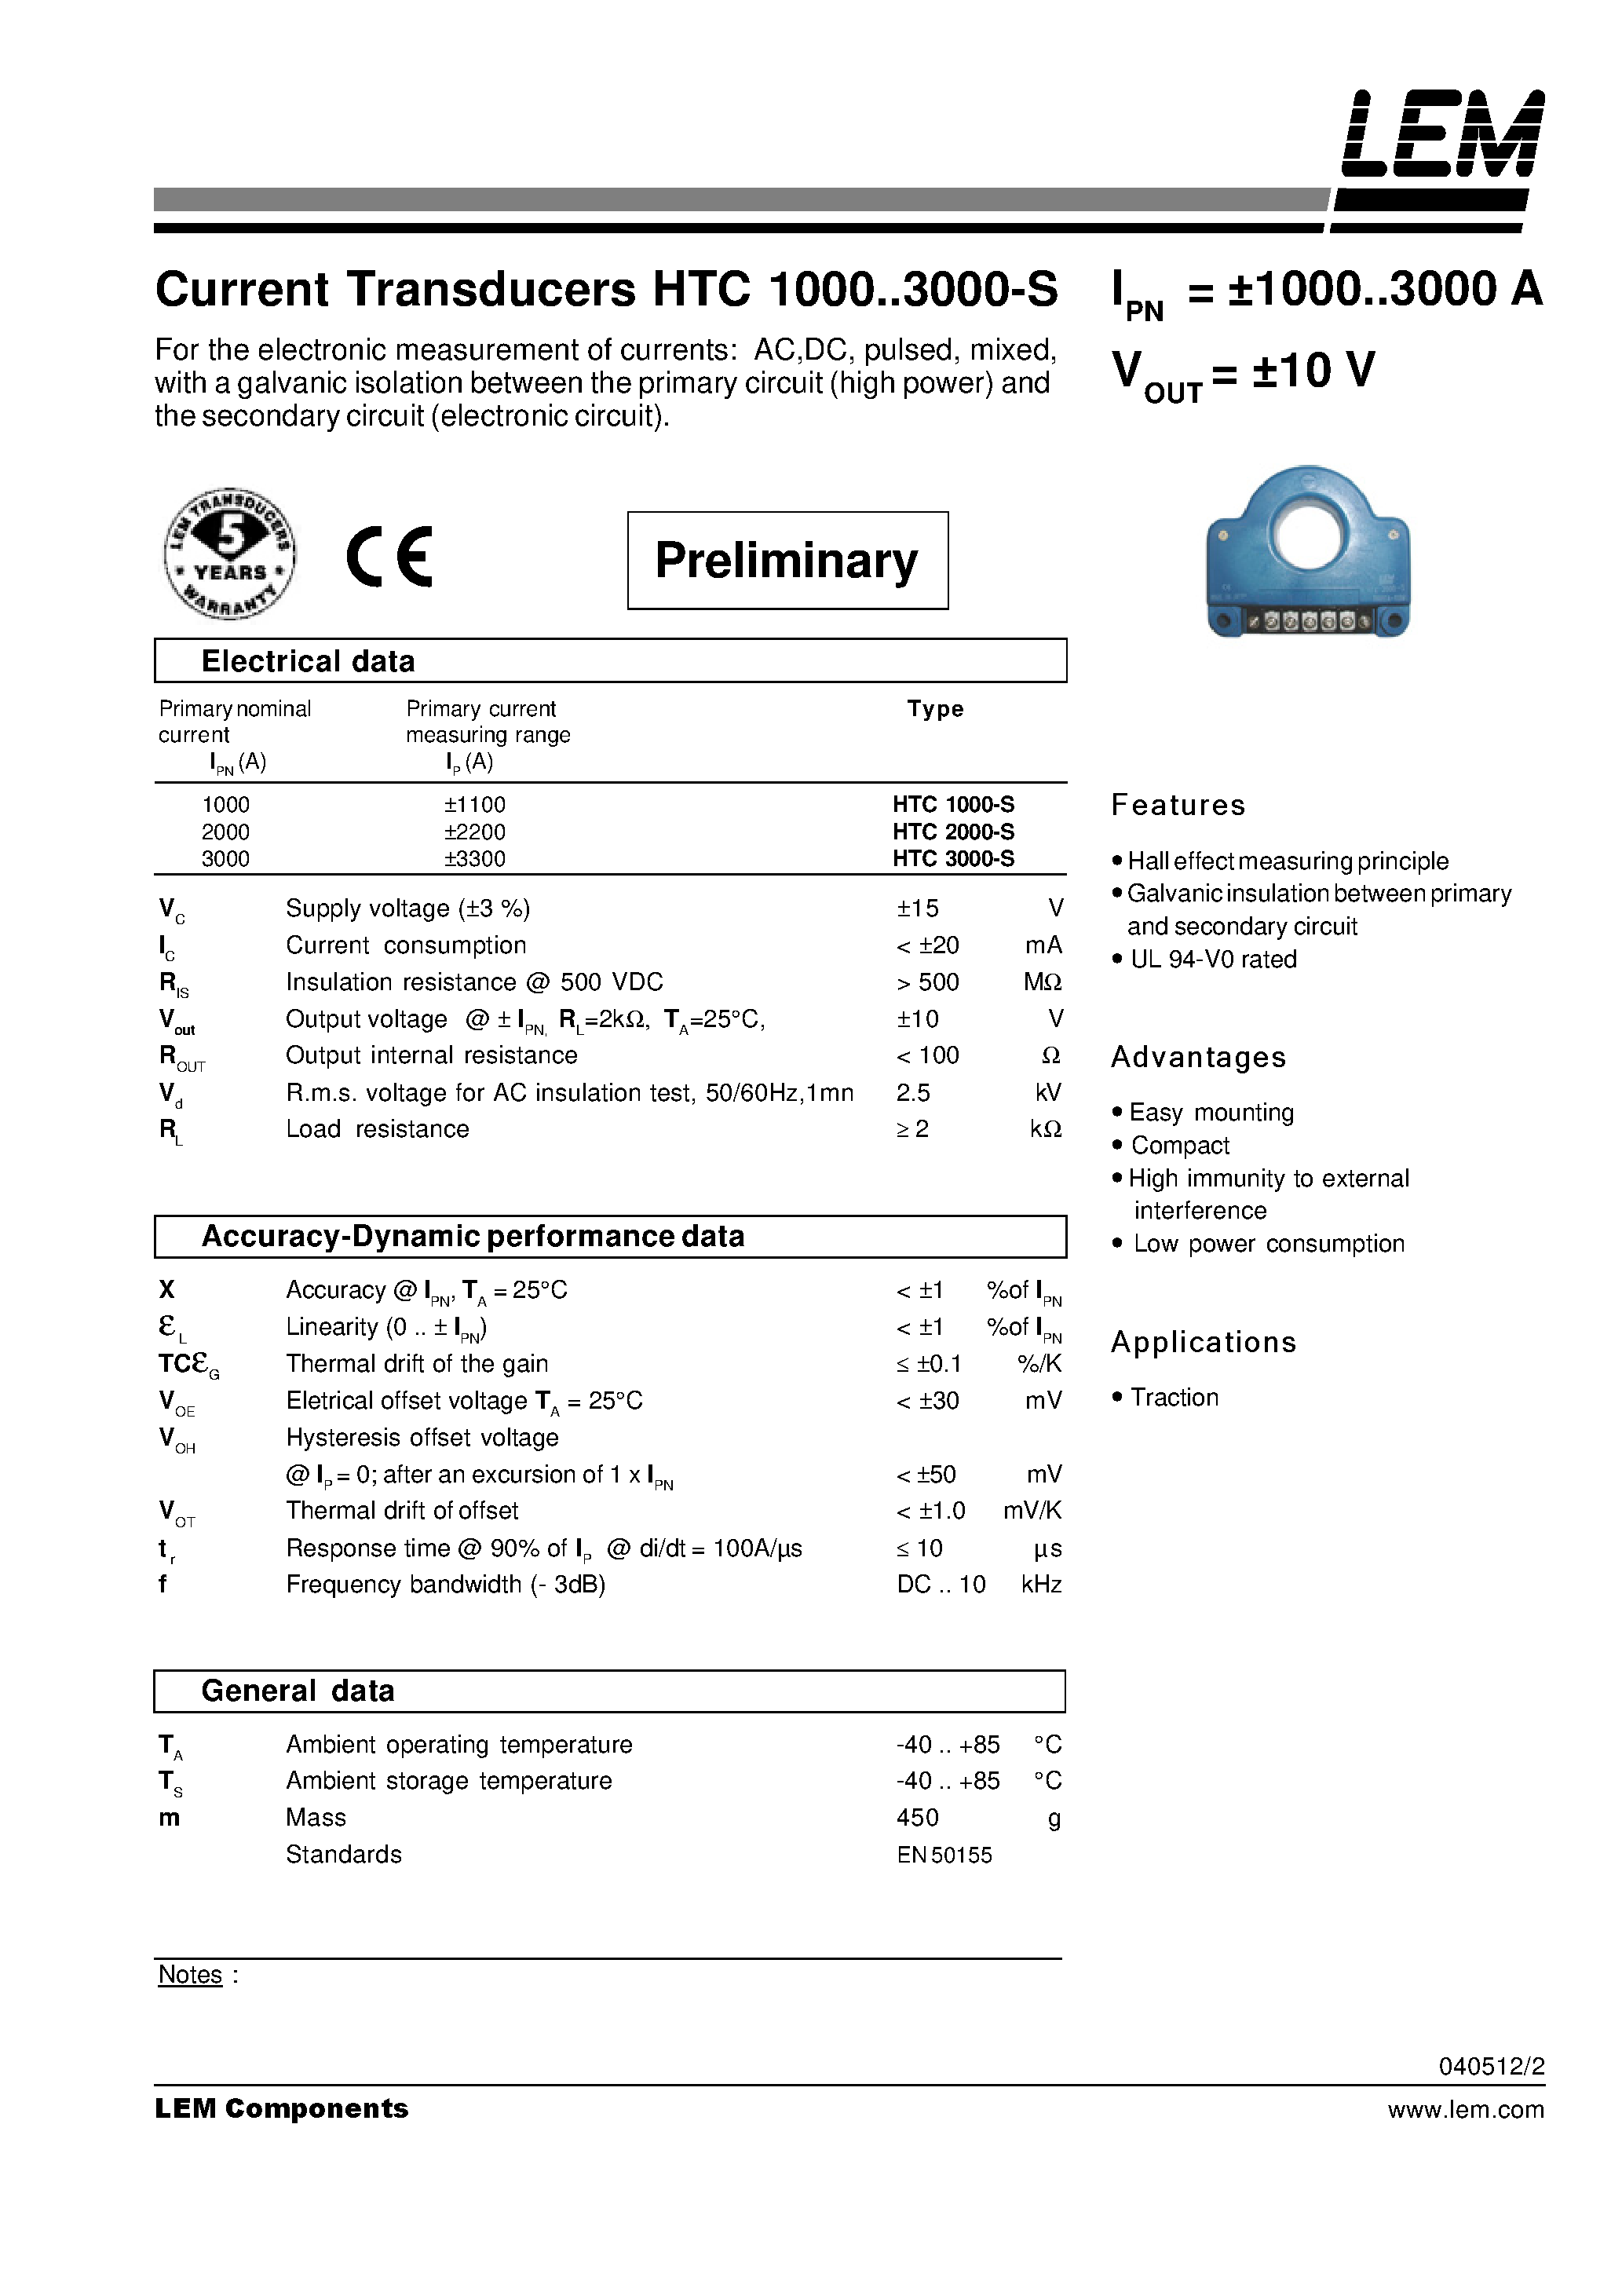 Datasheet HTC1000-S - Current Transducers HTC 1000~3000-S page 1